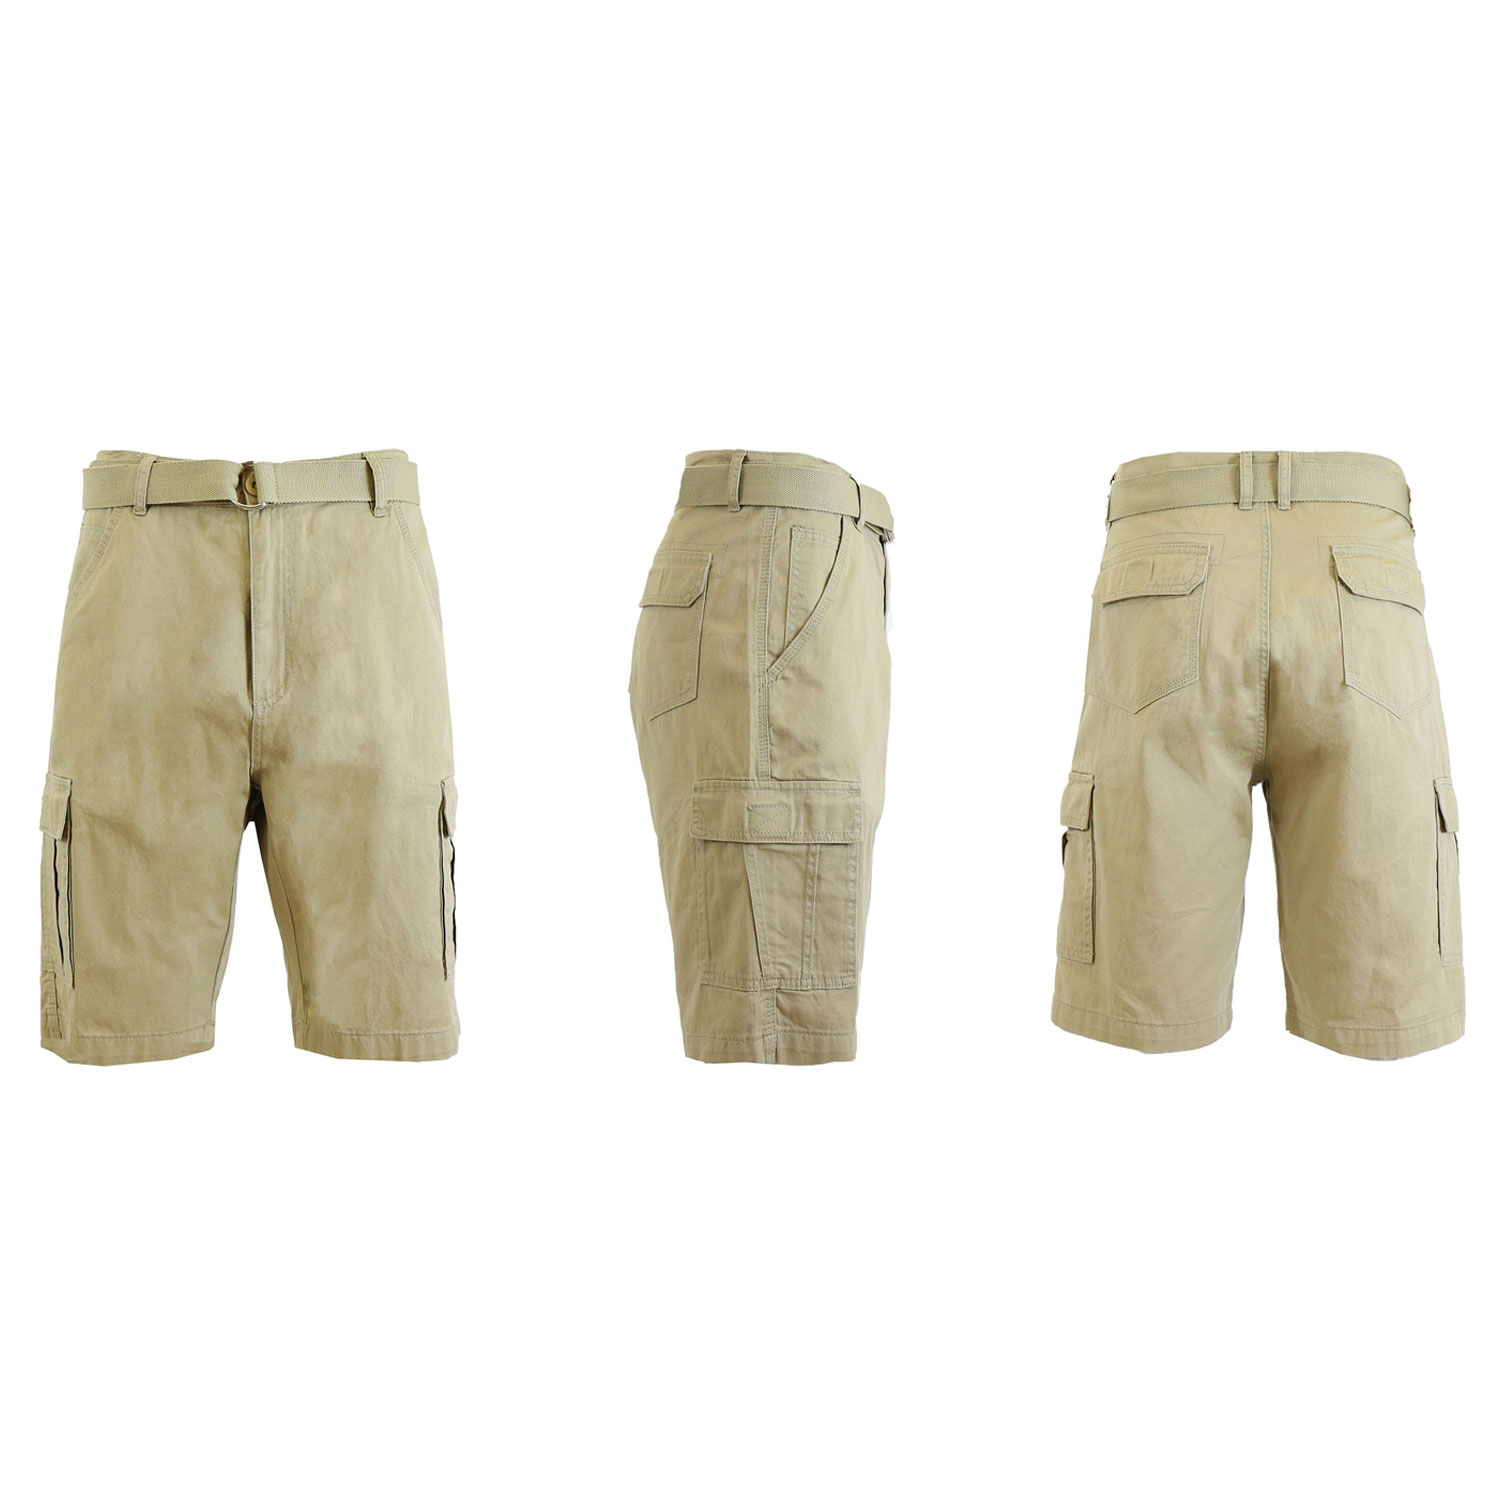 Men's Cotton Chino Shorts with Belt Sizes 30-42